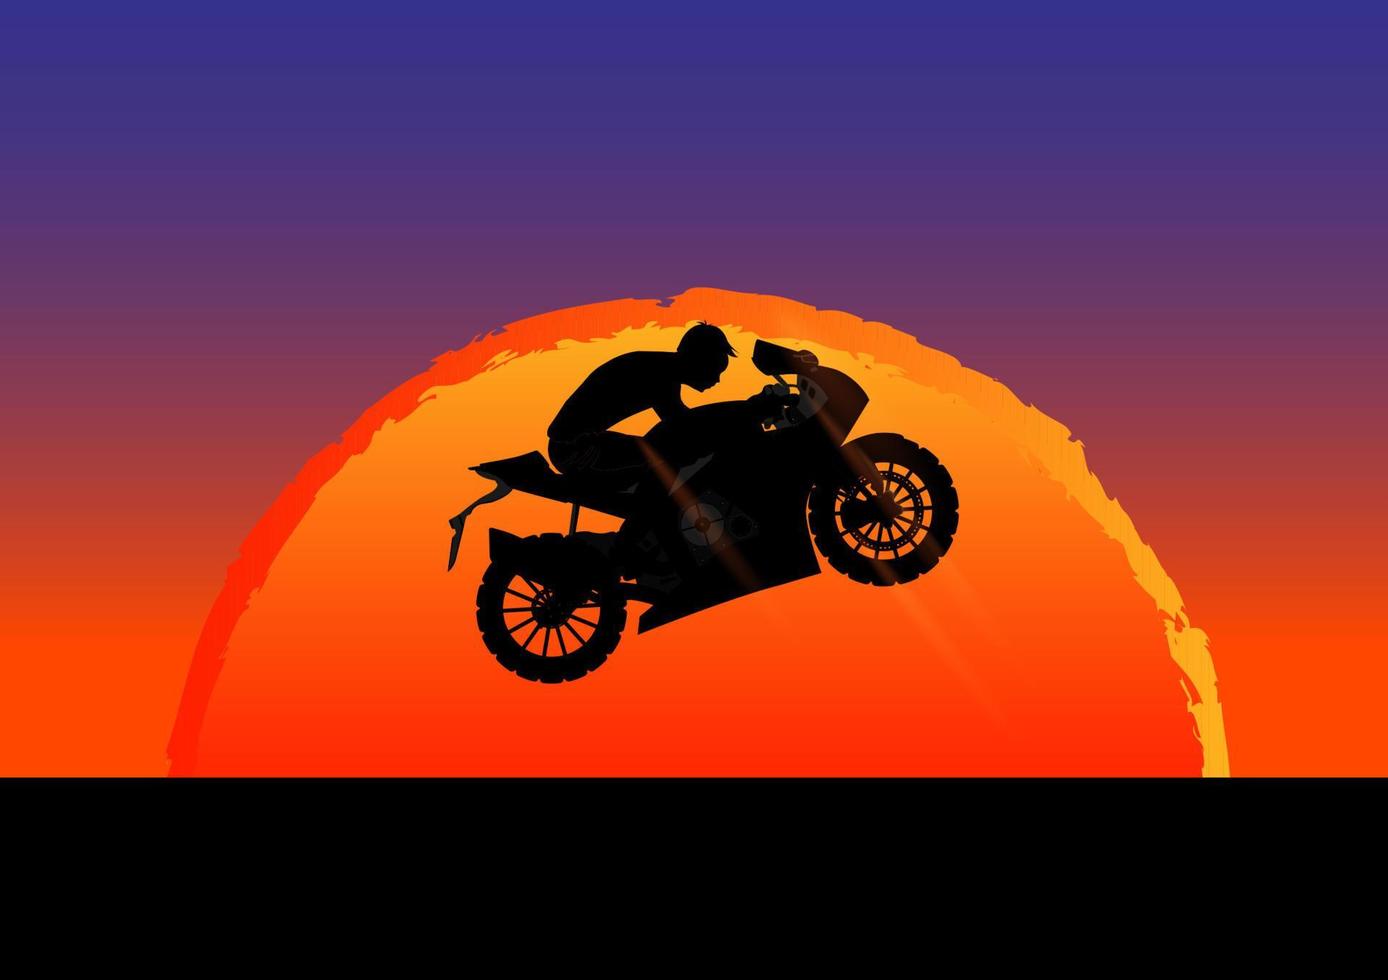 graphics drawing silhouette man riding motorcycle and jump with sunset background vector illustration